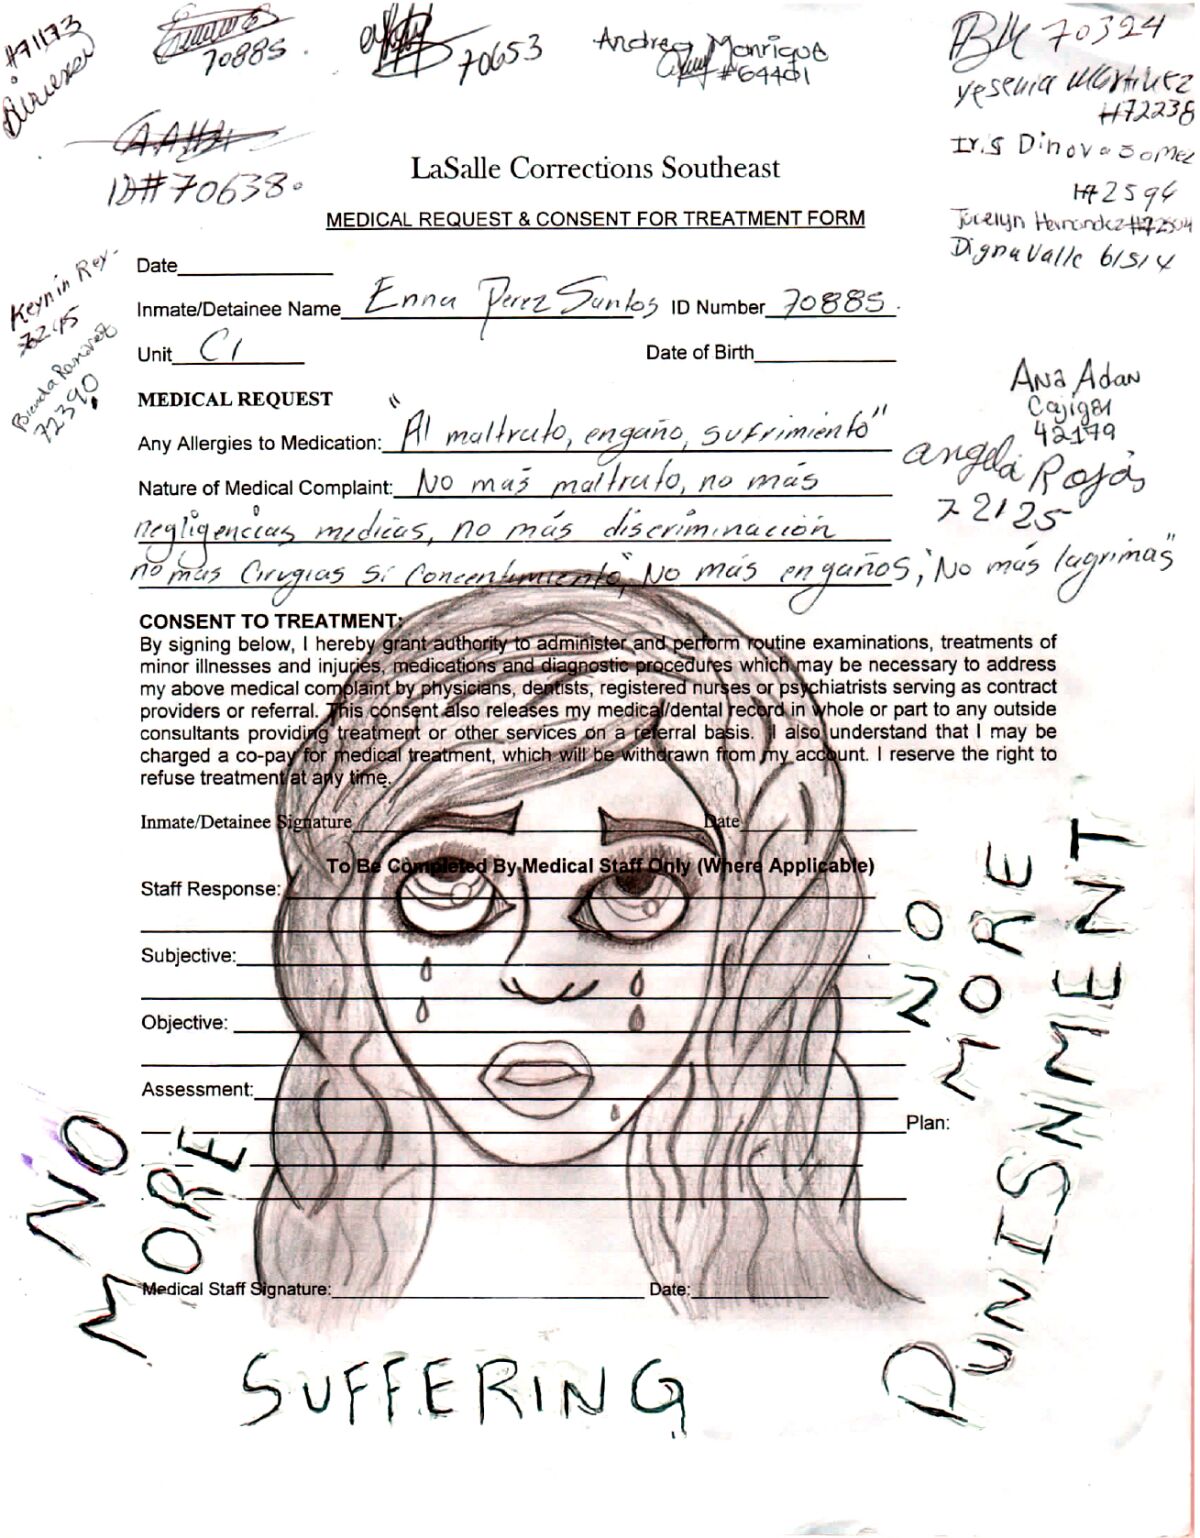 A drawing depicts a woman crying on a medical consent form.